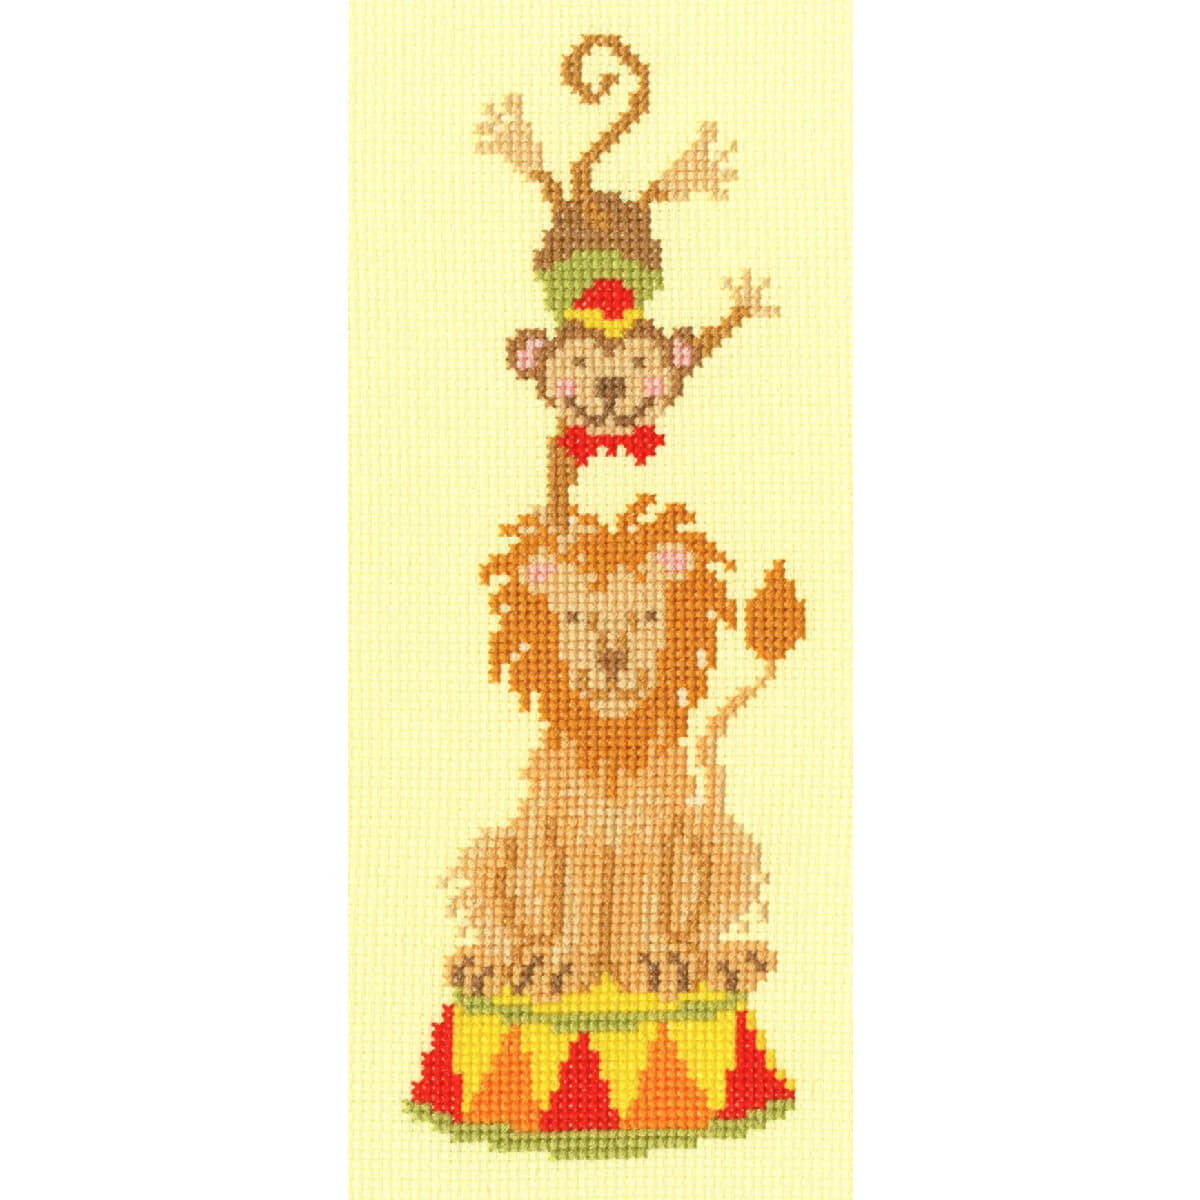 Bothy Threads counted cross stitch kit "The Greatest...